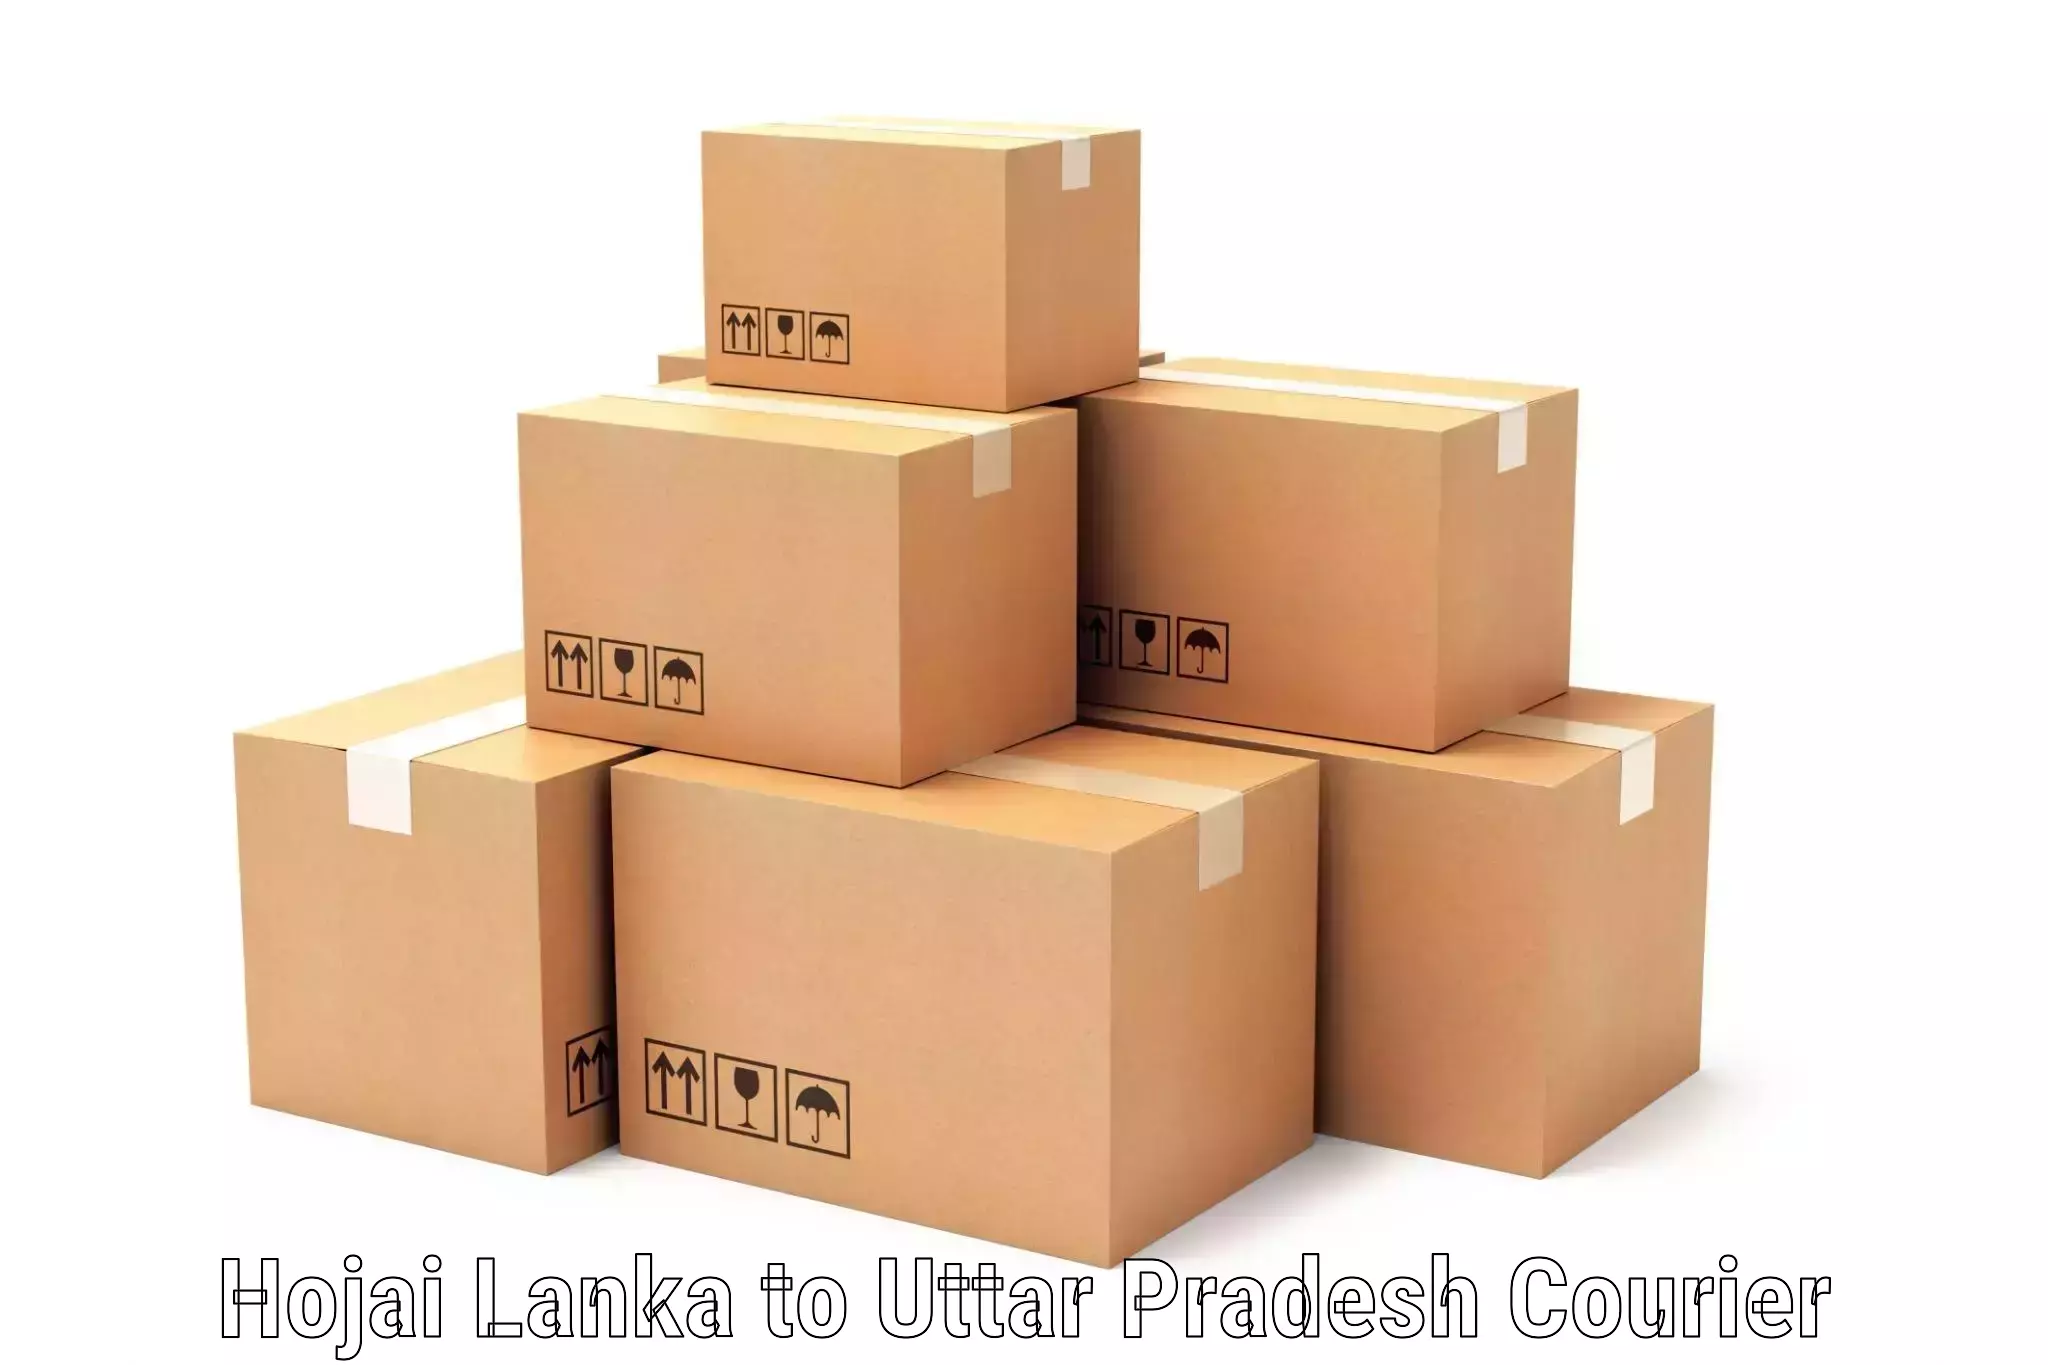 Scheduled delivery in Hojai Lanka to Mohammadi